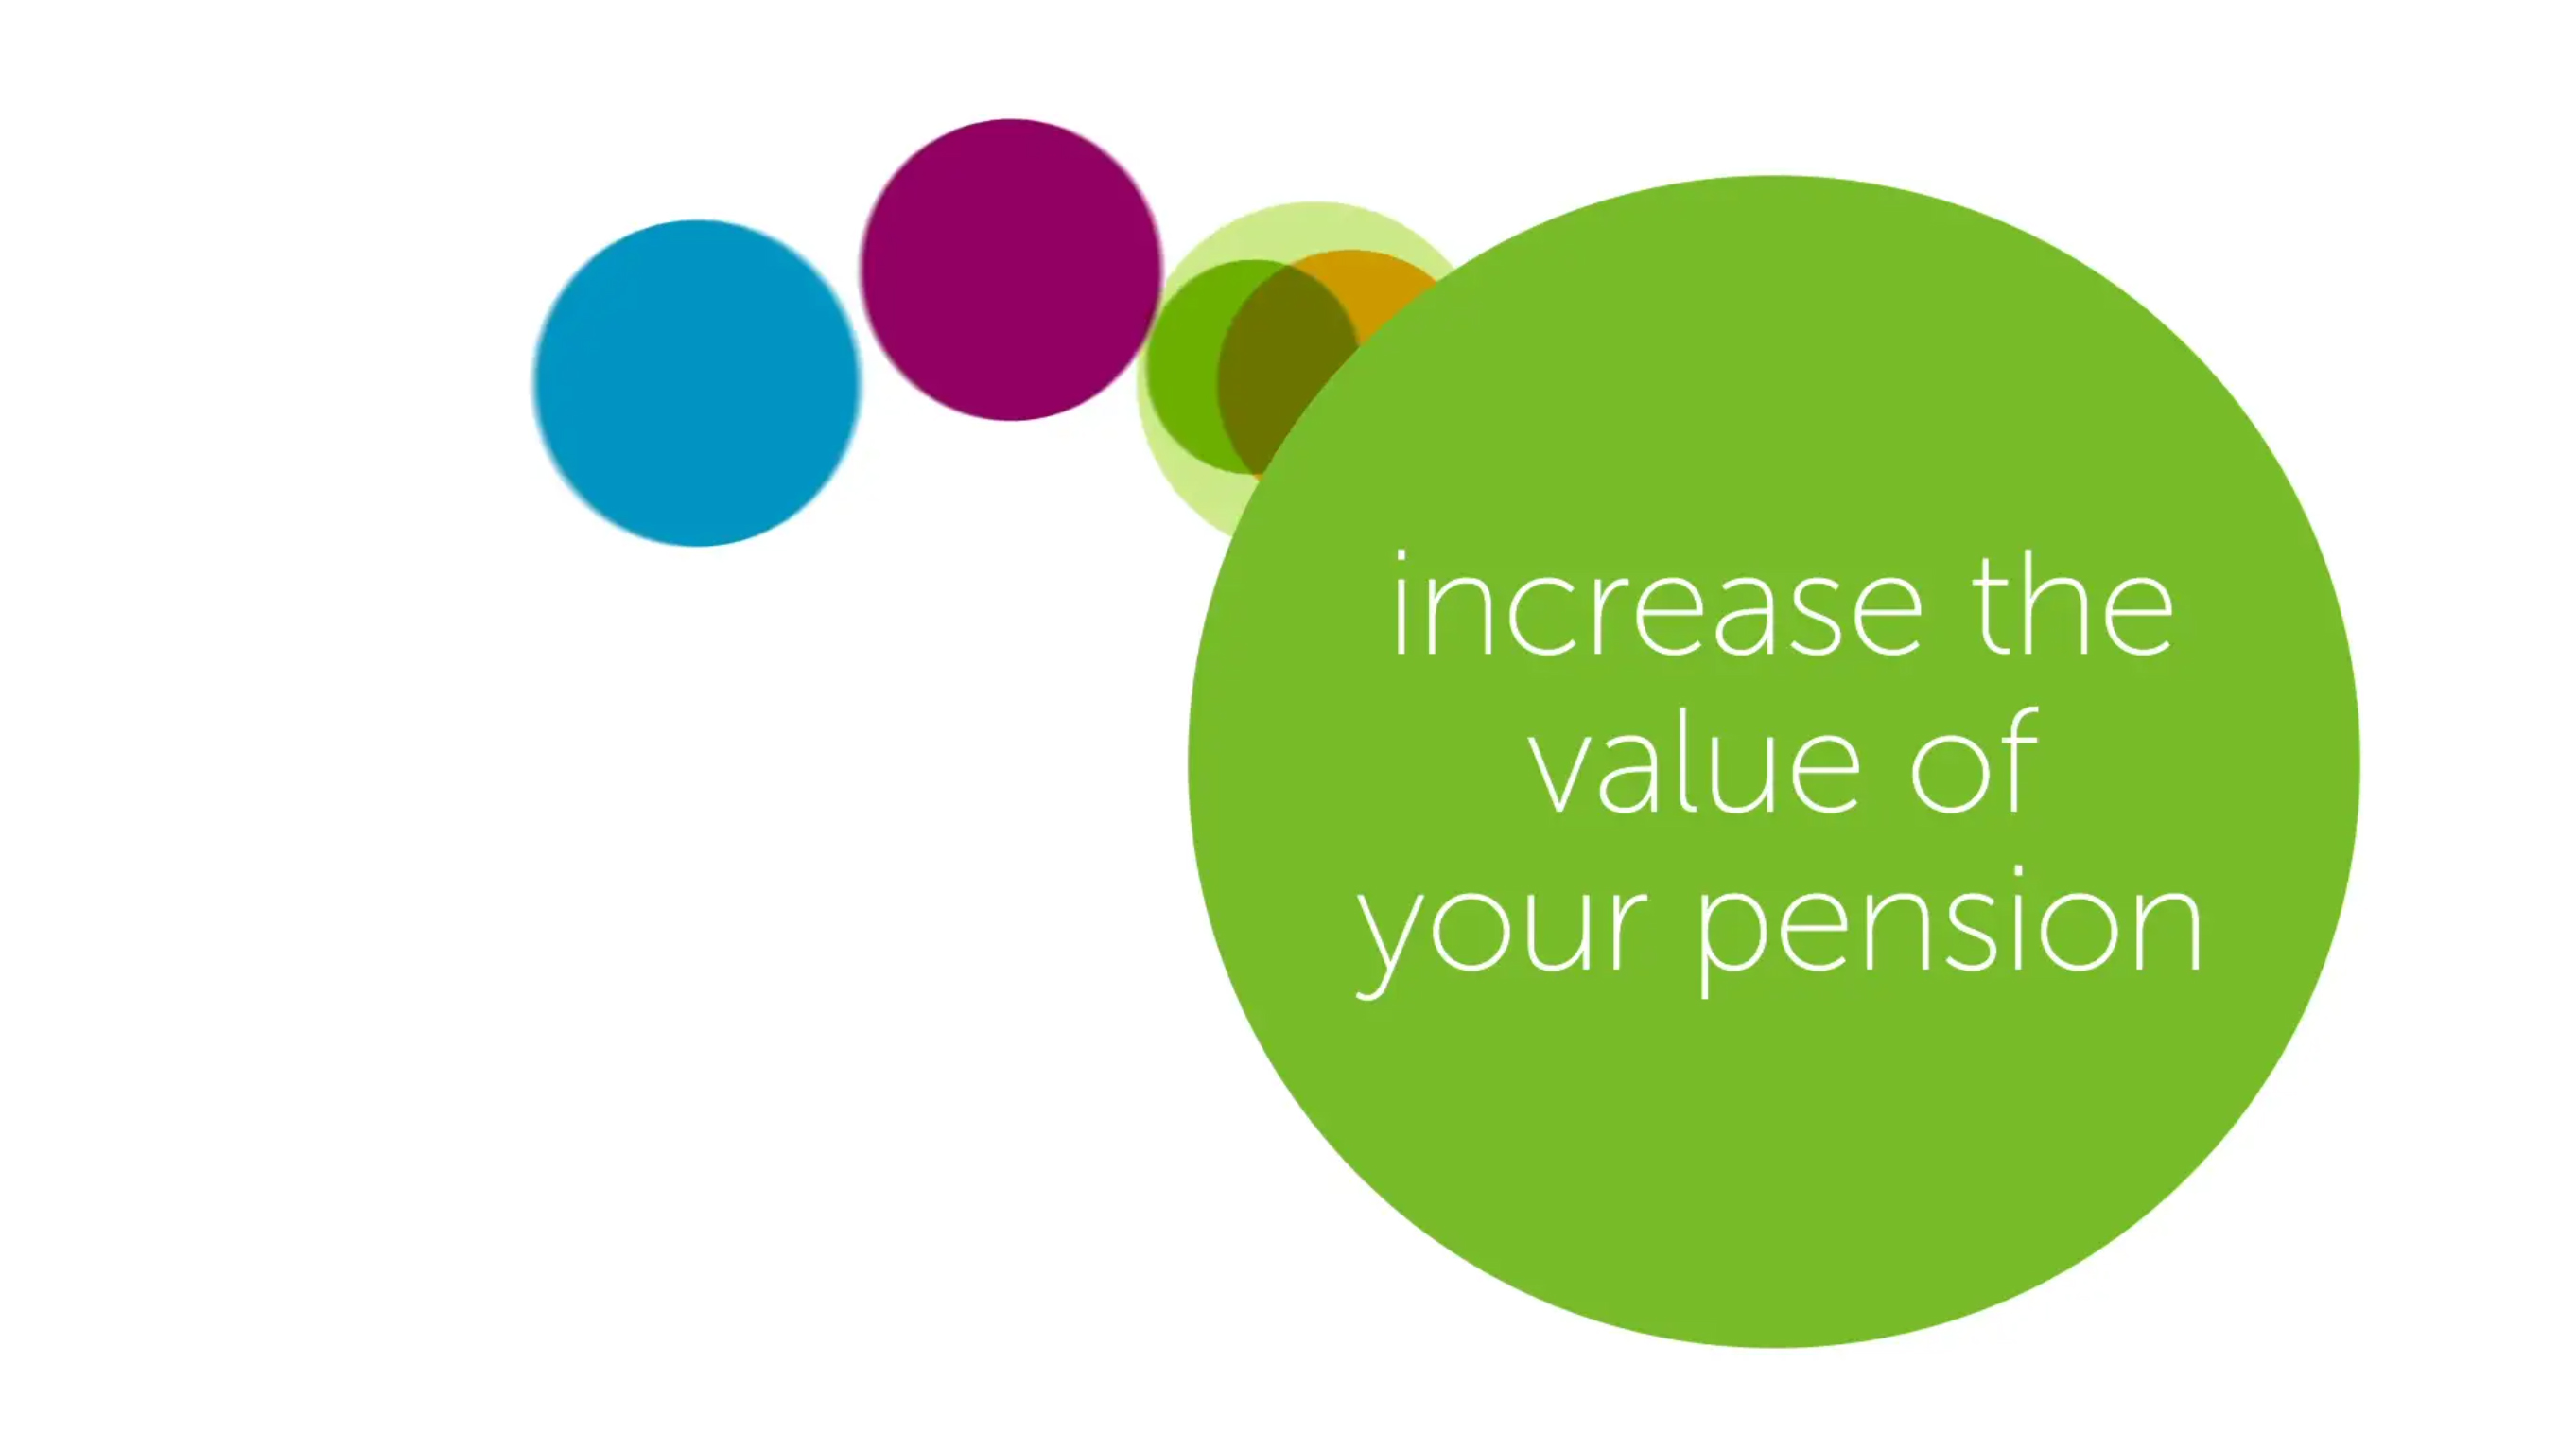 Increase the value of your pension